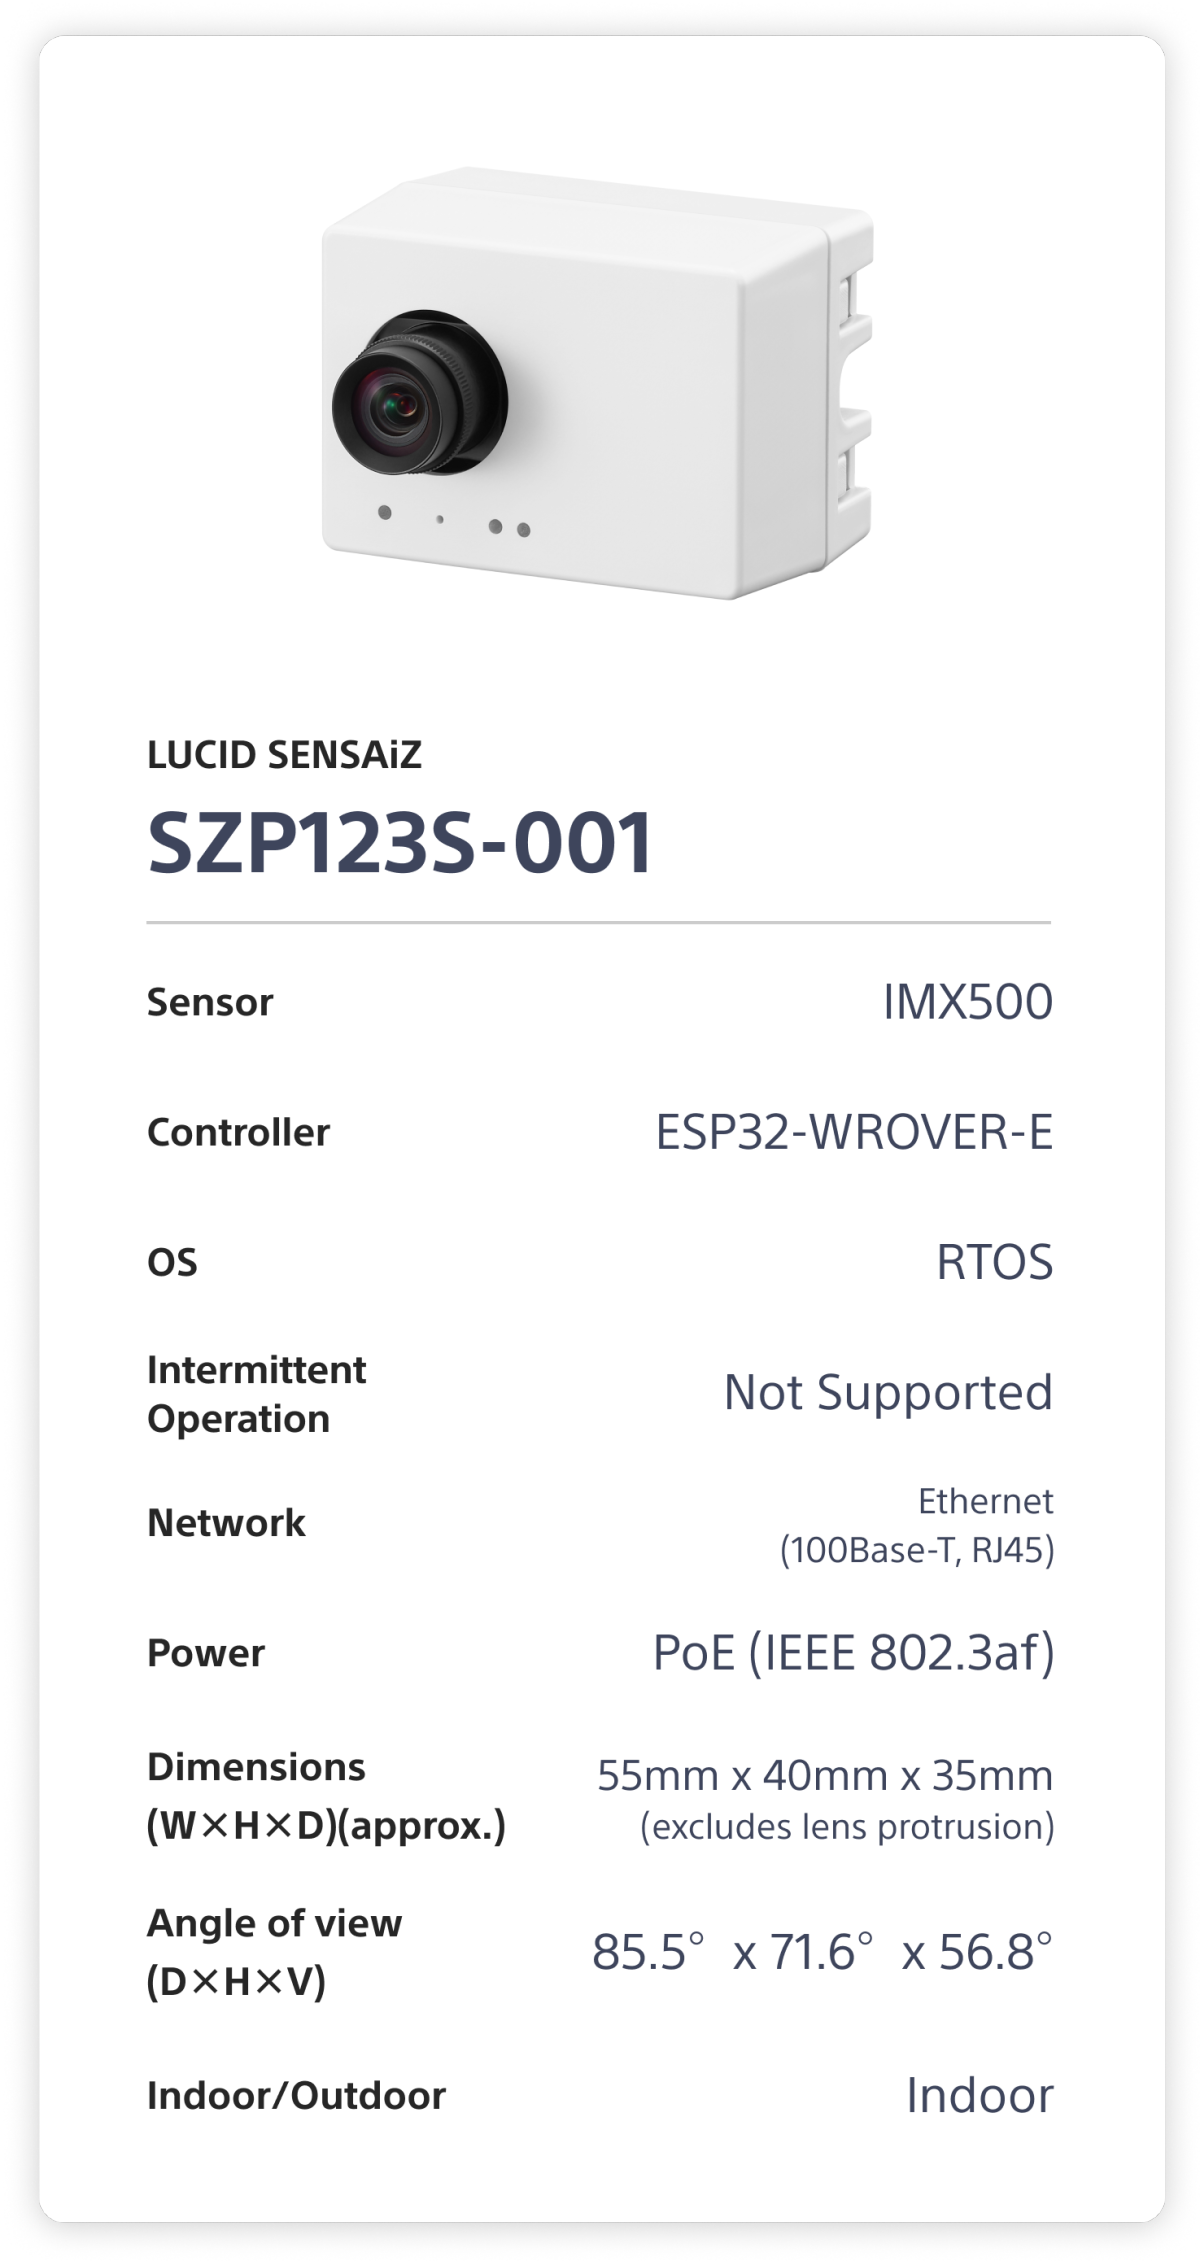 LUCID SENSAiZ  SZP123S-001. Sensor: IMX500. Controller: ESP32-WROVER-E. OS: RTOS. Intermittent Operation: Not Supported. Network: Ethernet (100Base-T, RJ45). Power: PoE (1EEE 802.3af). Dimensions (W×H×D)(approx.): 55mm x 40mm x 35mm (excludes lens protrusion). Angle of view (D×H×V): 85.5°x 71.6°x 56.8°. Indoor/Outdoor: Indoor.